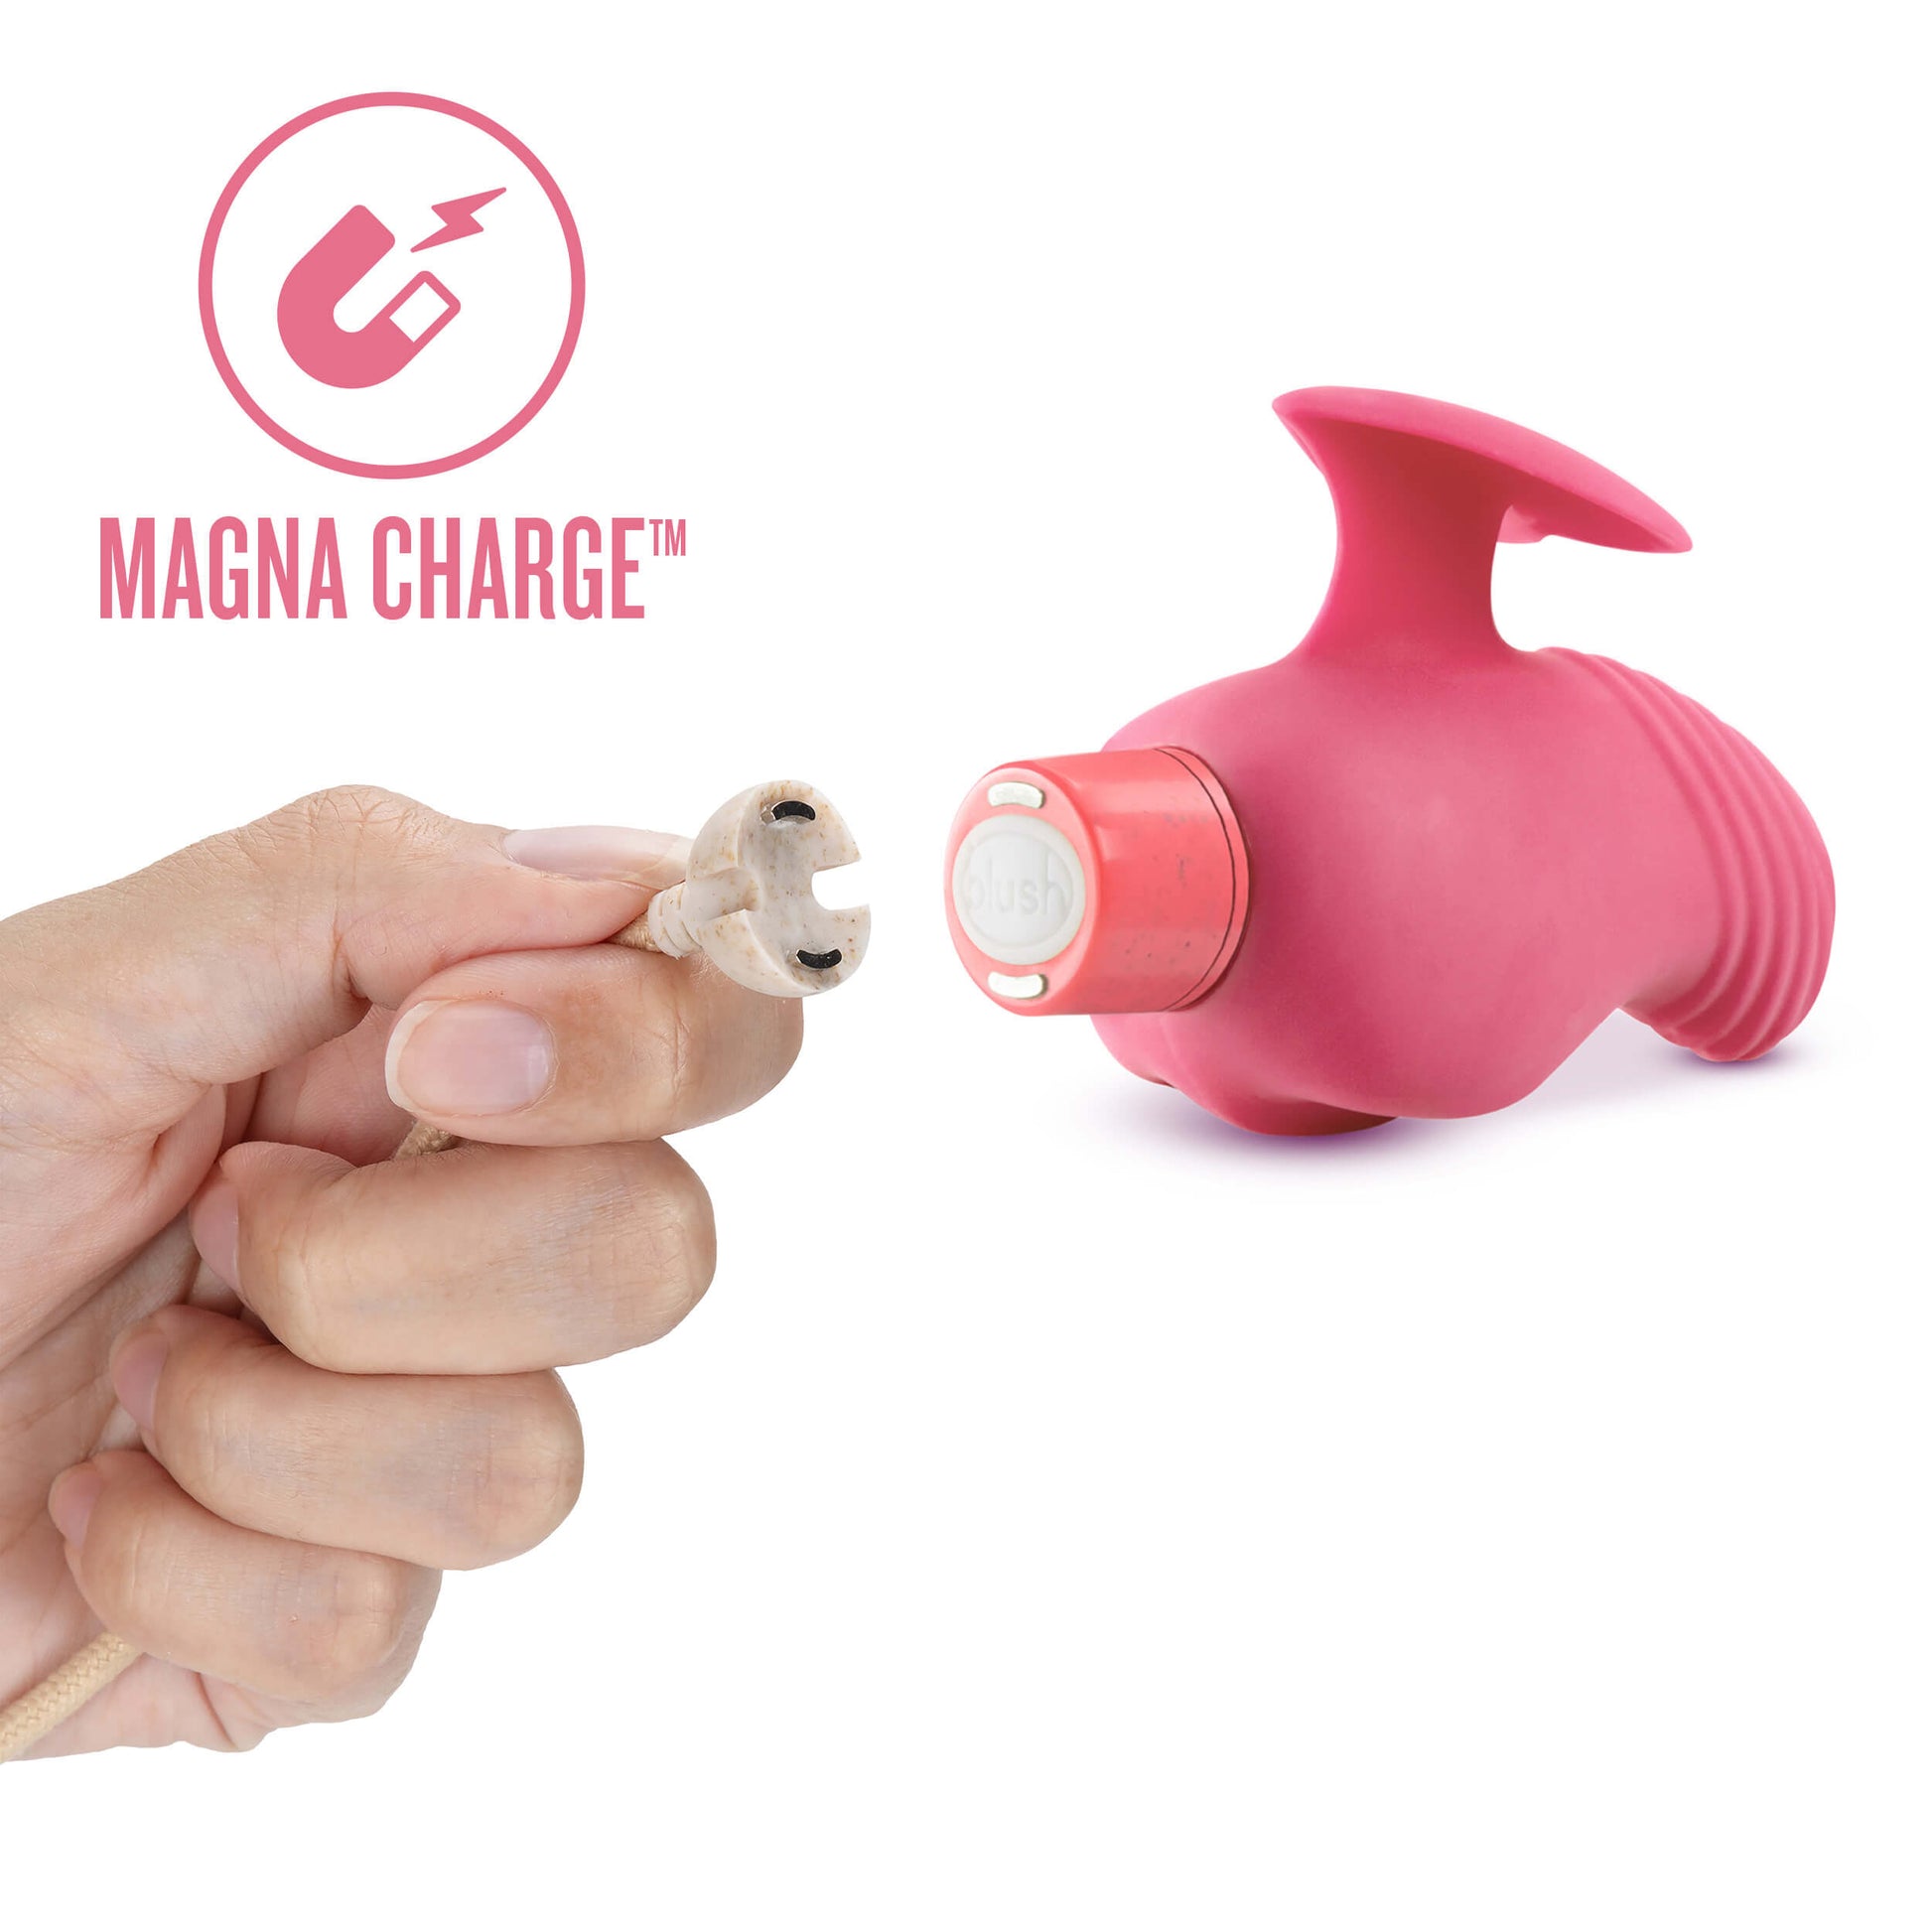 Blush Gaia Eco Love Magna Charge - by The Bigger O online sex toy shop. USA, Canada and UK shipping available.